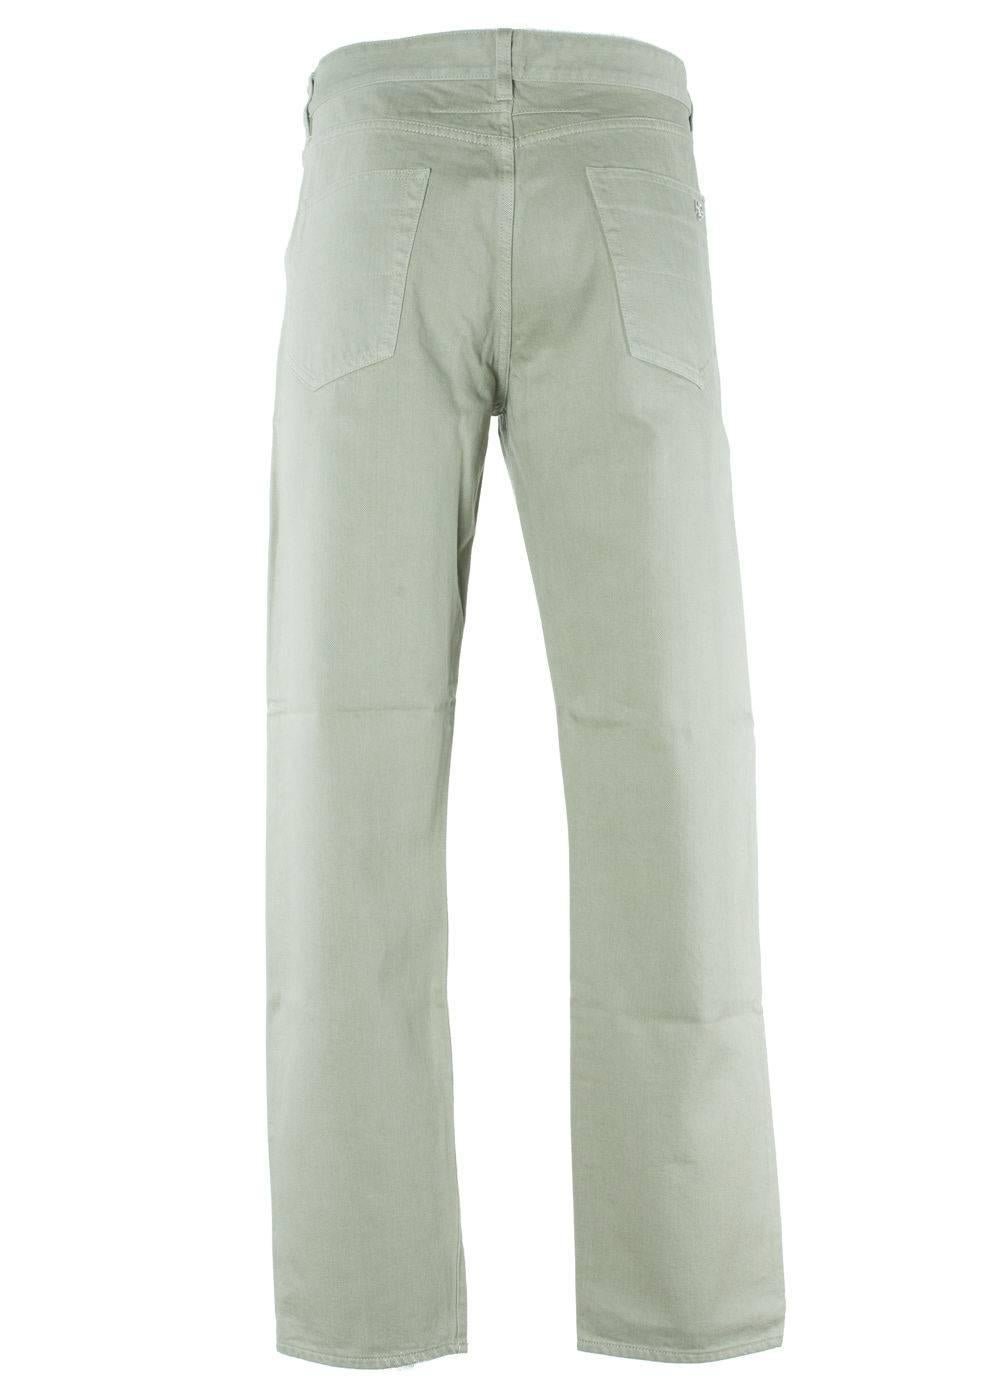 Brand New Givenchy Men's Corduroys
Original Tag
Retails in Stores & Online for $510
Men's Size US 33 Fits True to Size

Corduroy silhouette pants are a must have for any man's closet on all four season. These light olive corduroys are super